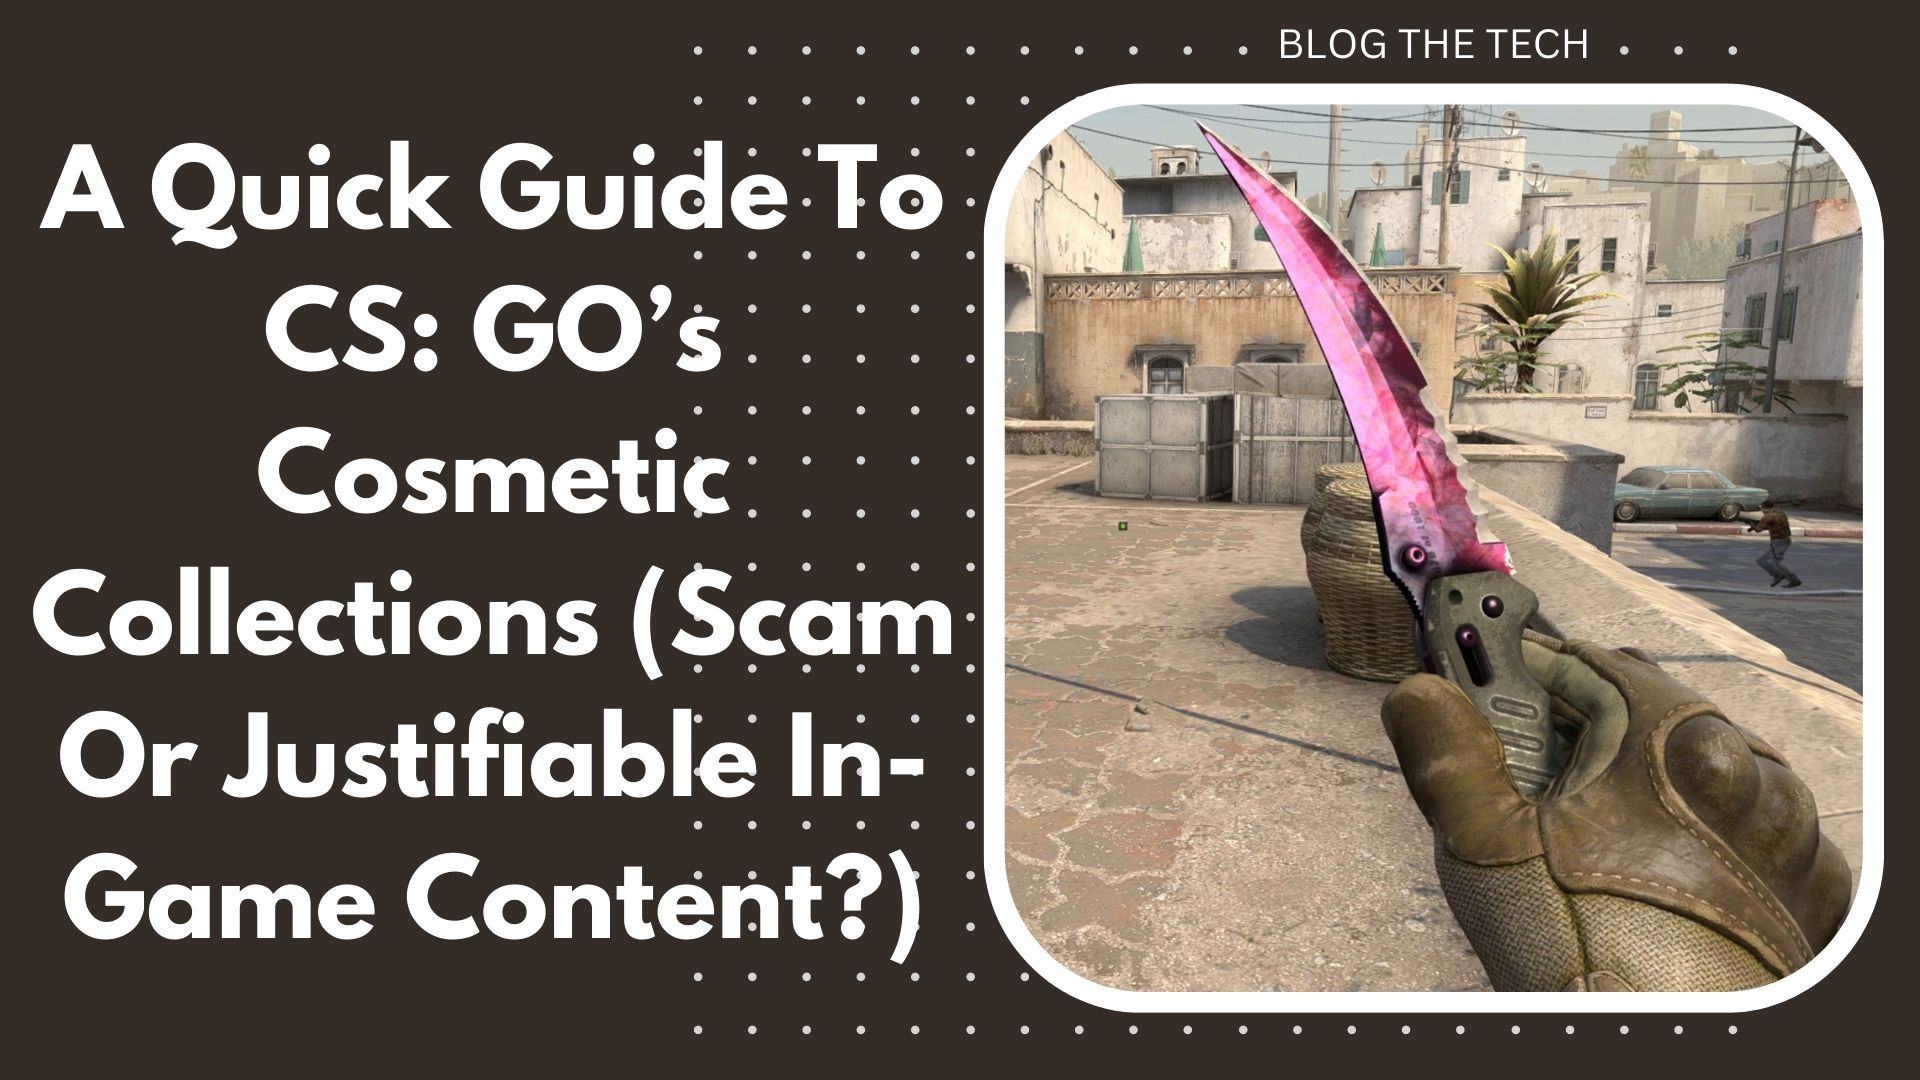 A Quick Guide To CS: GO’s Cosmetic Collections (Scam Or Justifiable In-Game Content?)